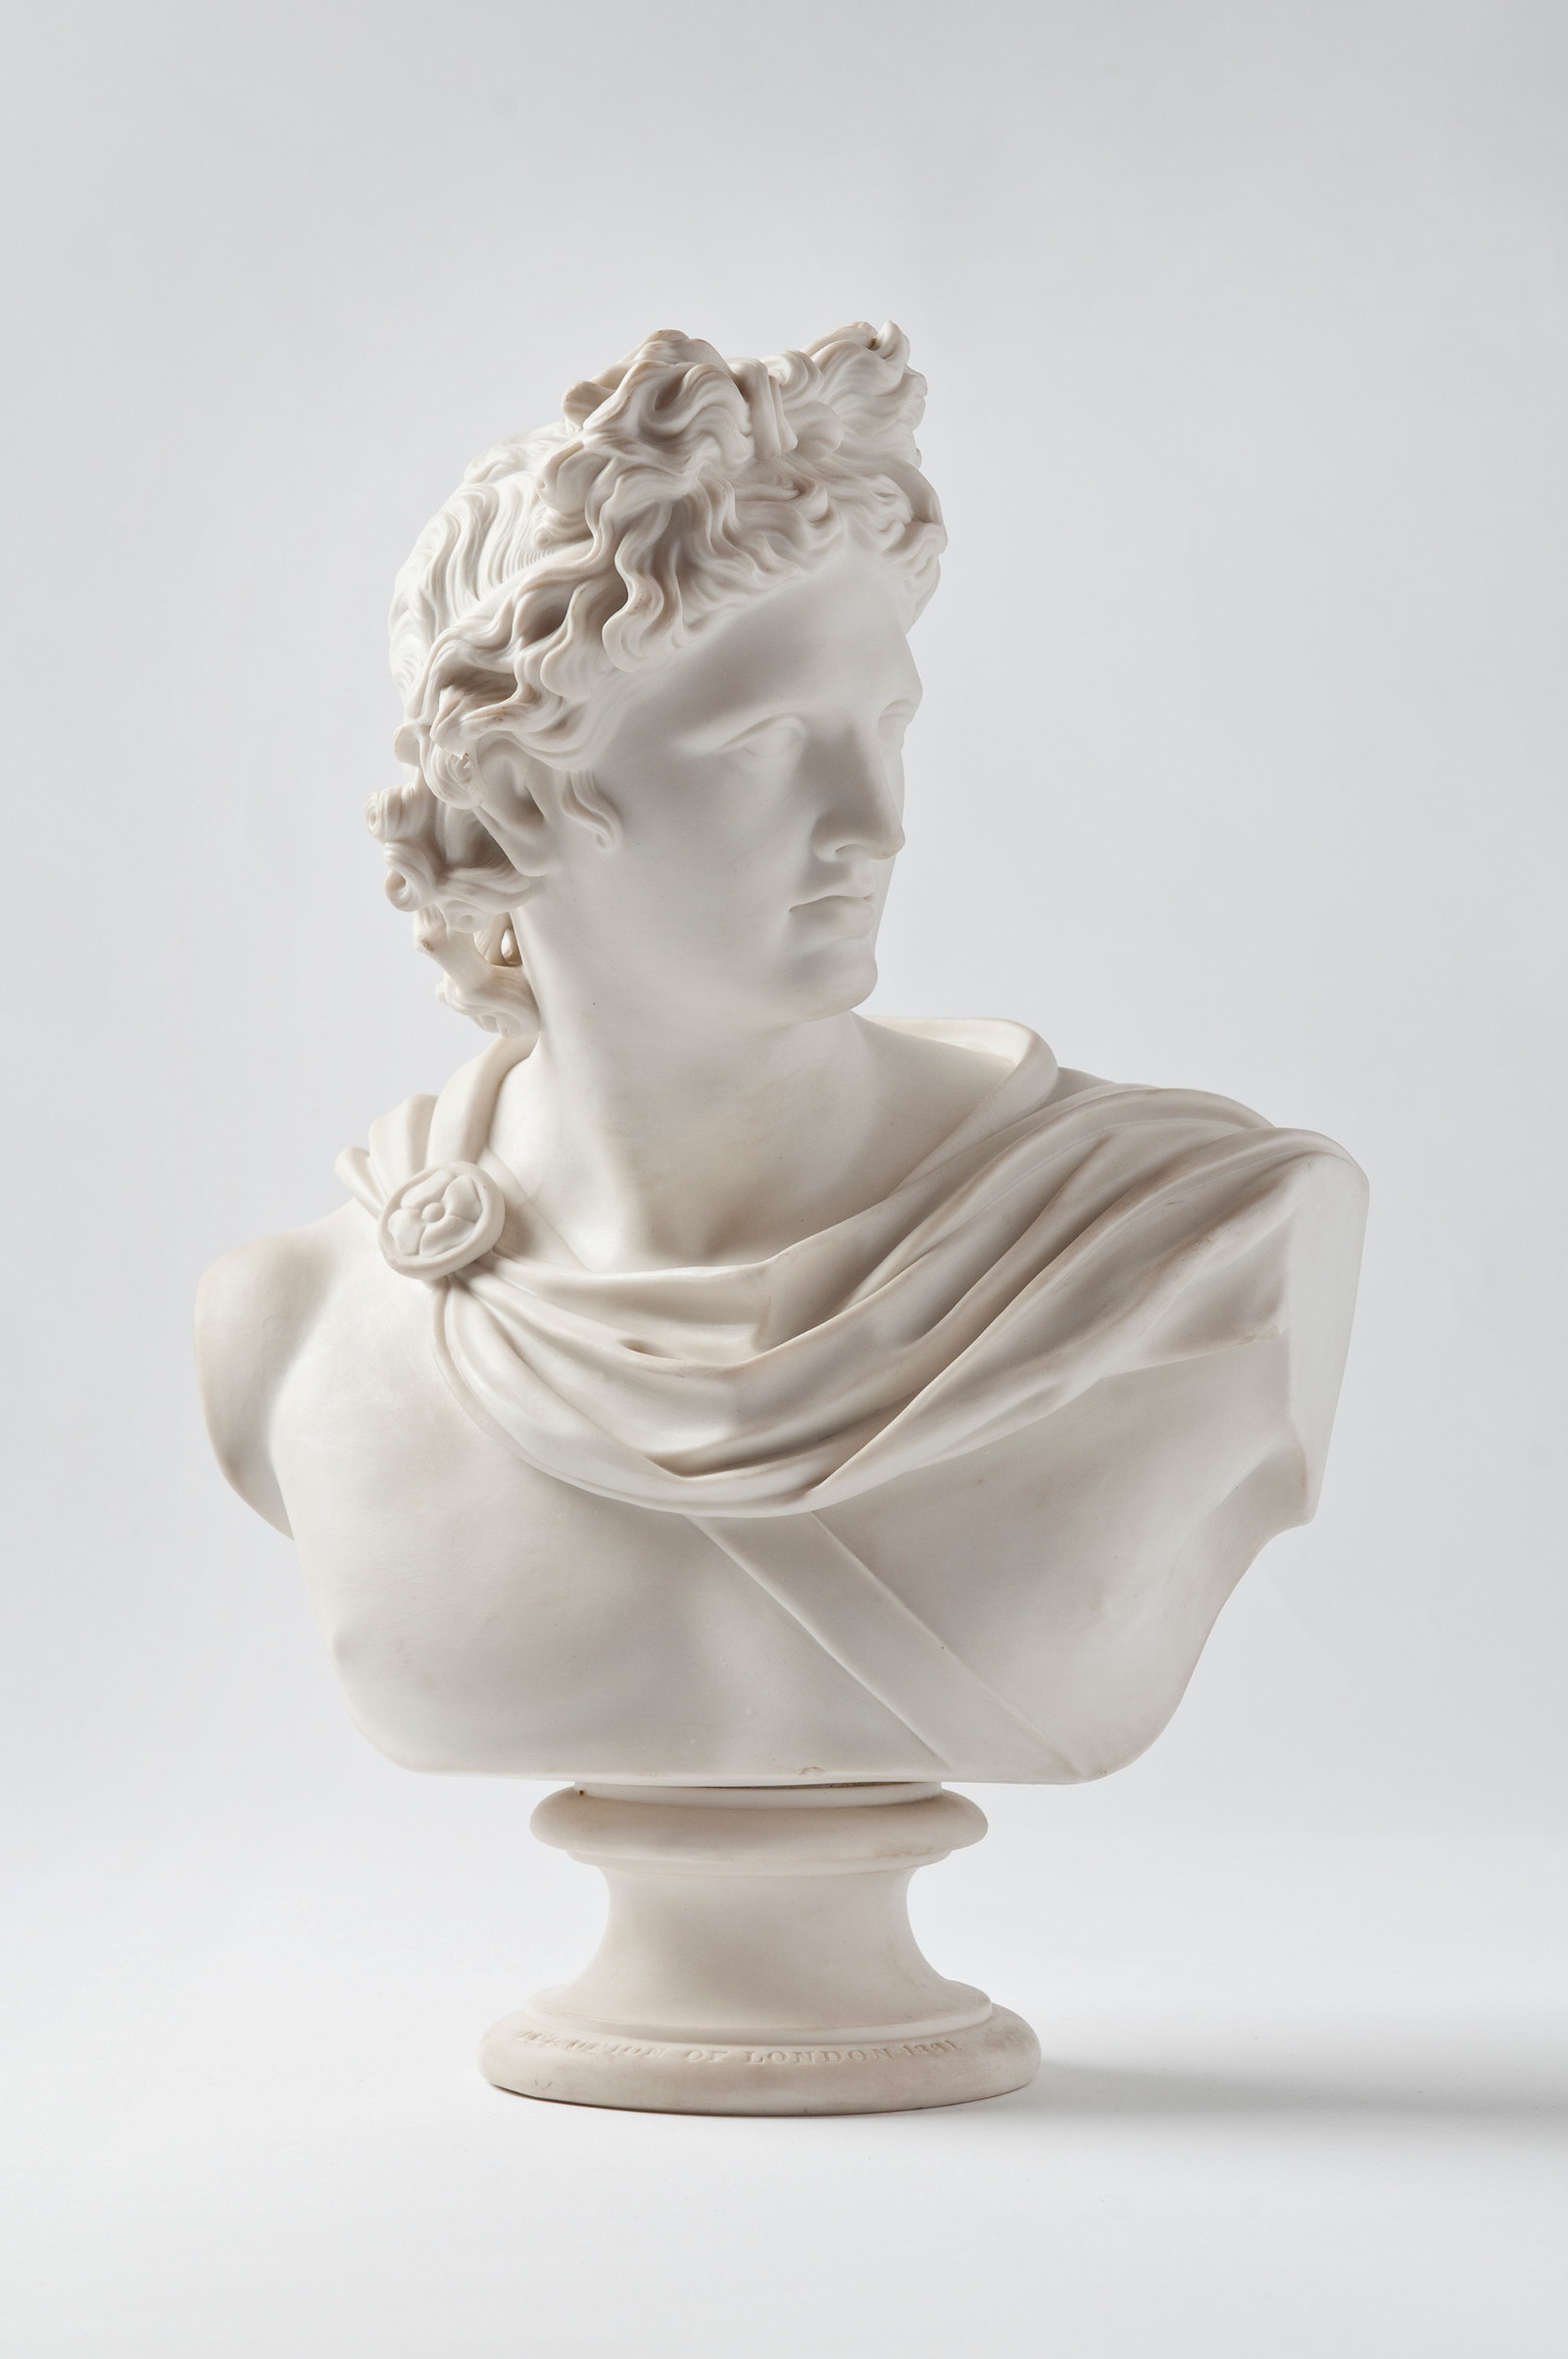 White bust of man wearing wreath in hair and drapery around neck, on pedestal.